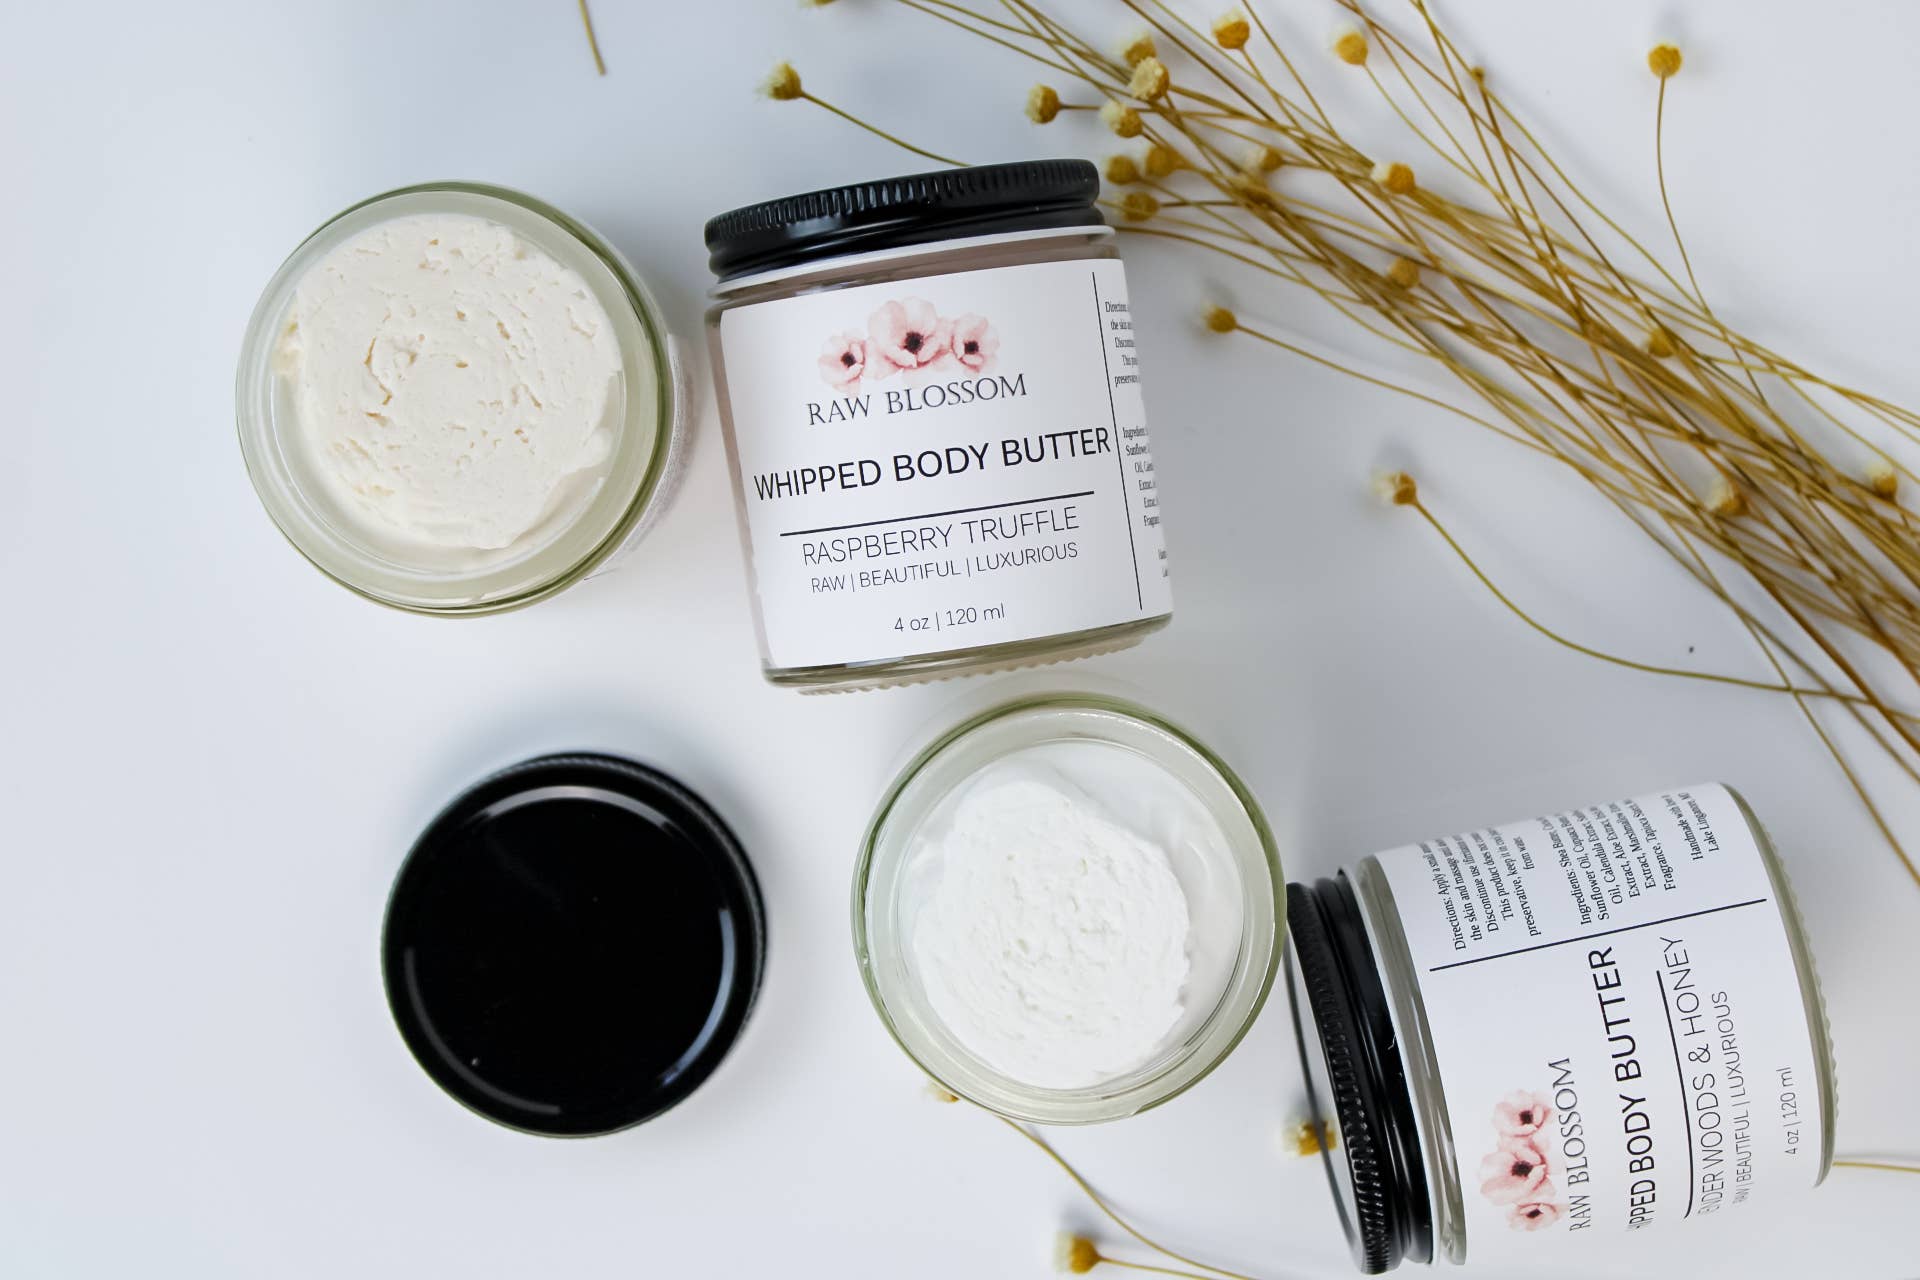 Whipped Body Butter - Raspberry Truffle by Raw Blossom sold by Rolling Stop Creations Boutique - Event - Faire - Gift